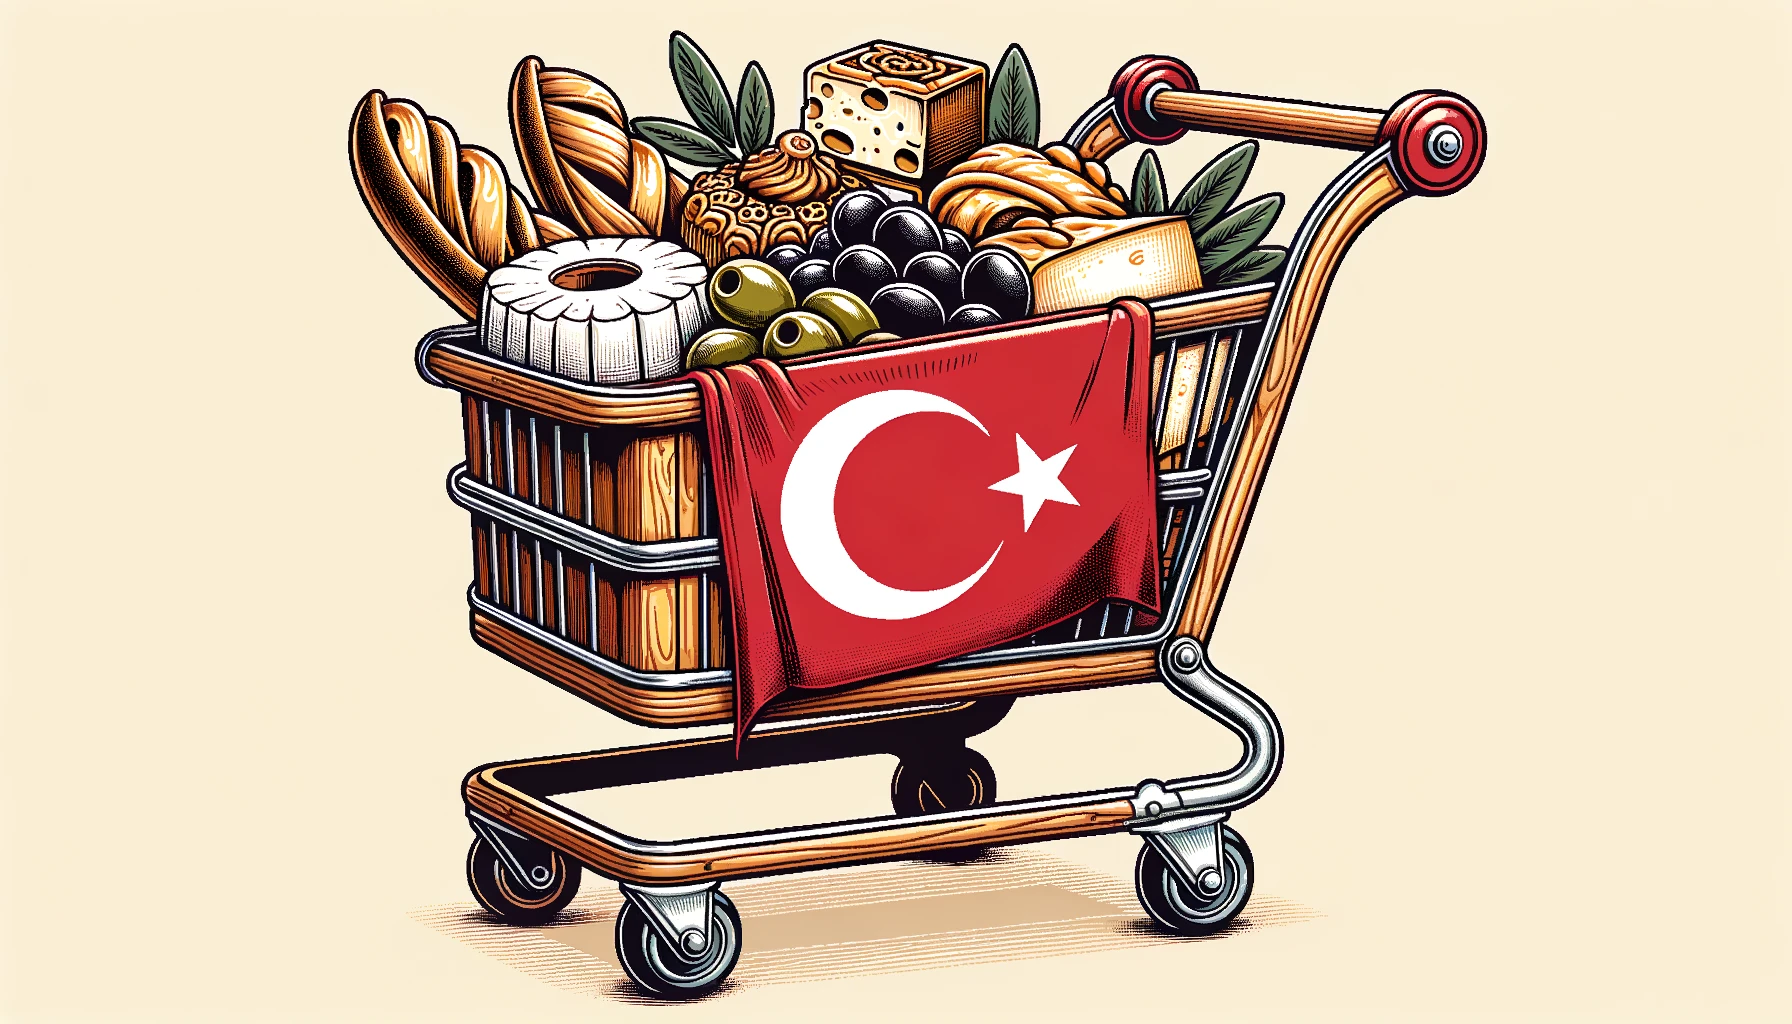 Buying things from Turkey